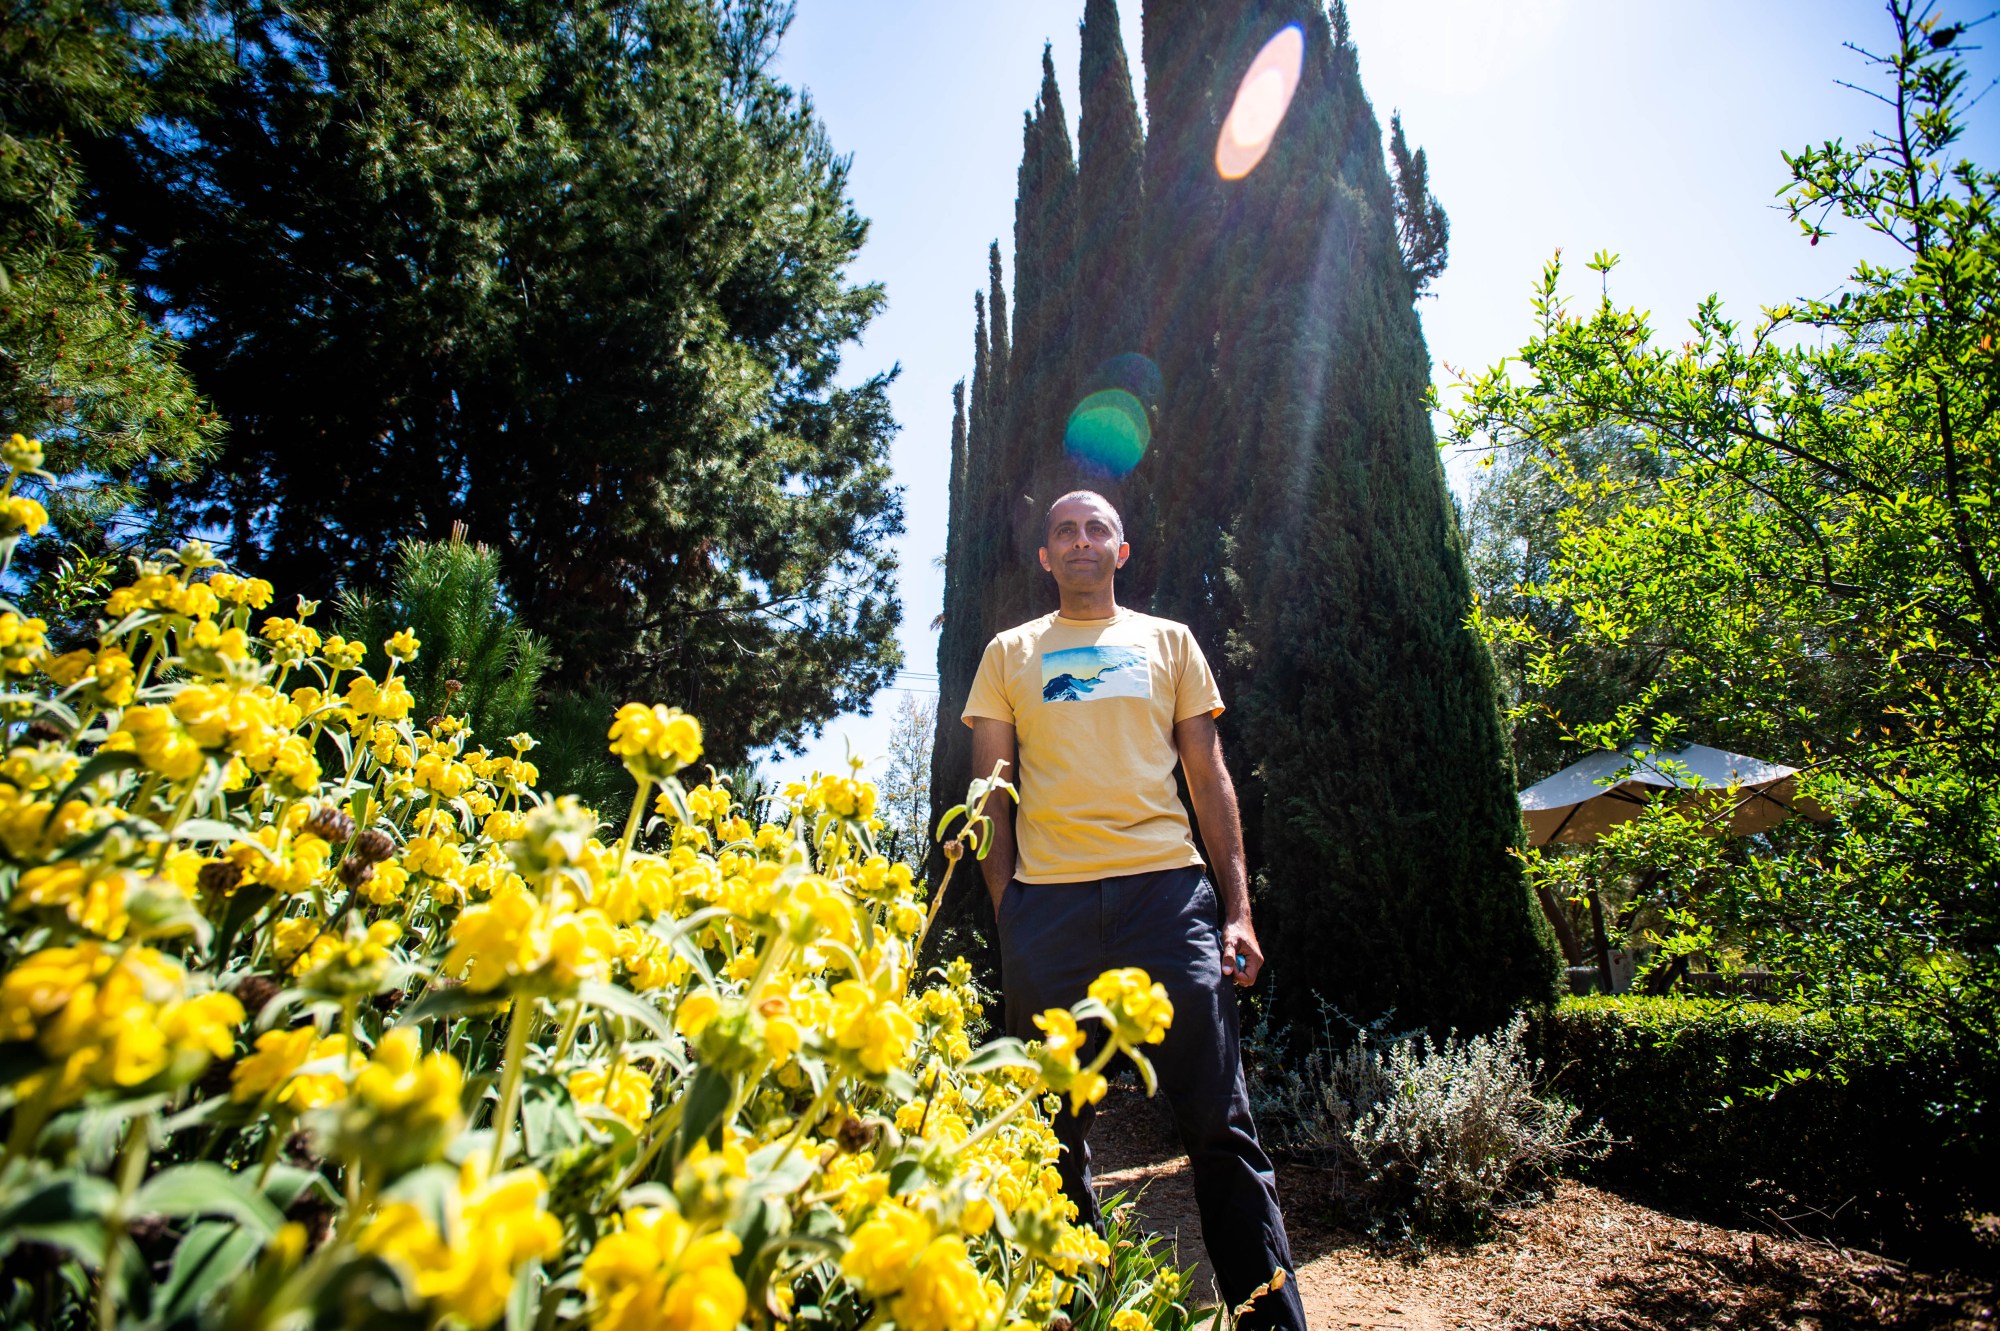 Abhi Arora, CEO of Healing Gardens, visits Arlington Garden in Pasadena on Friday, April 16, 2021. Arora, who recovered from stress by spending time in gardens, cofounded the garden booking company so others could find peace in a garden. (Photo by Sarah Reingewirtz, Los Angeles Daily News/SCNG)